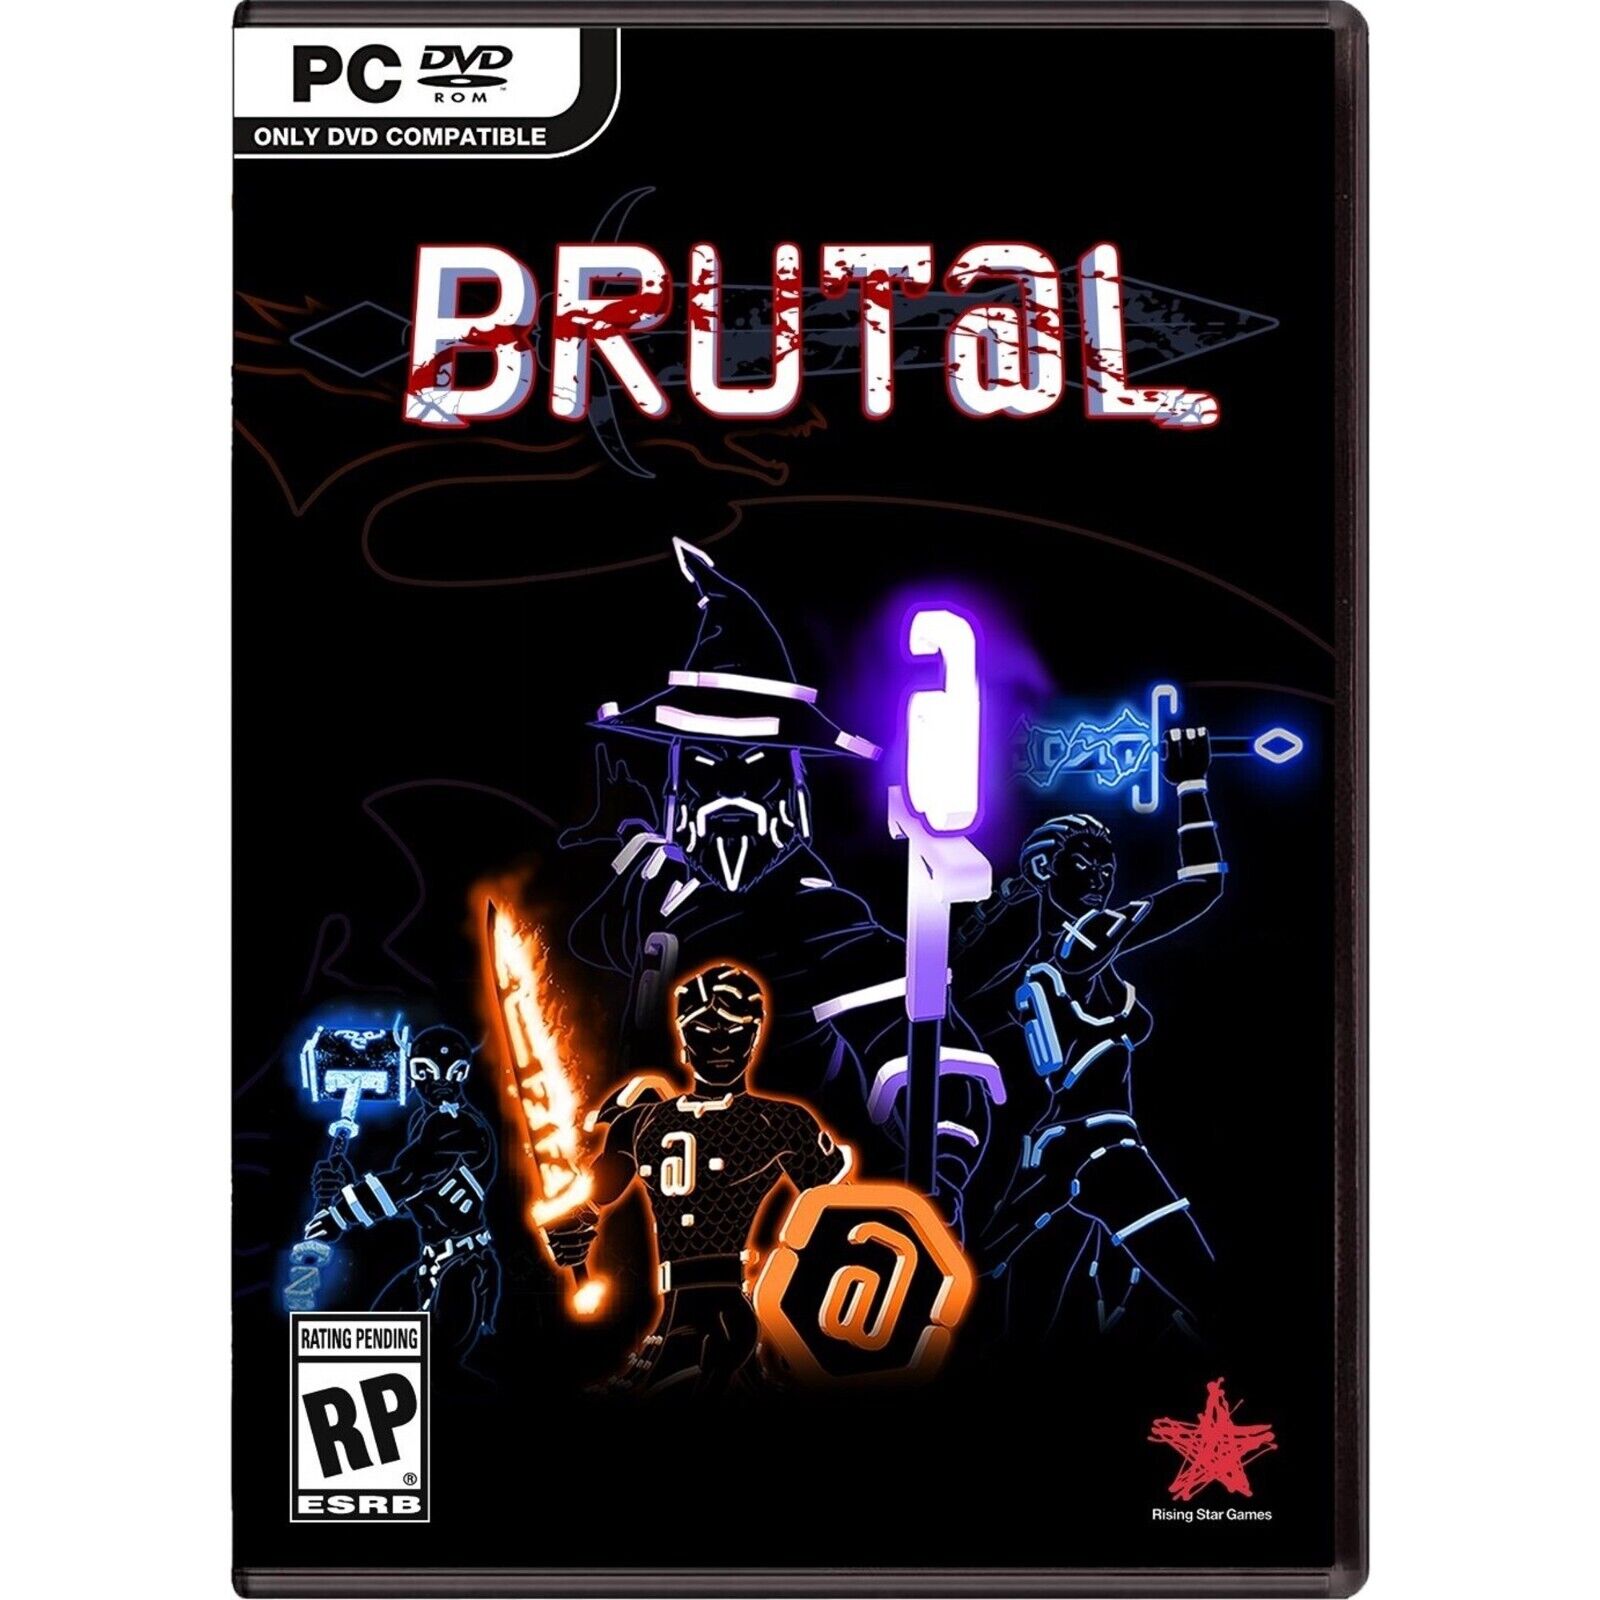 BRAND NEW SEALED! Brutal - PC Game Rising Star Games